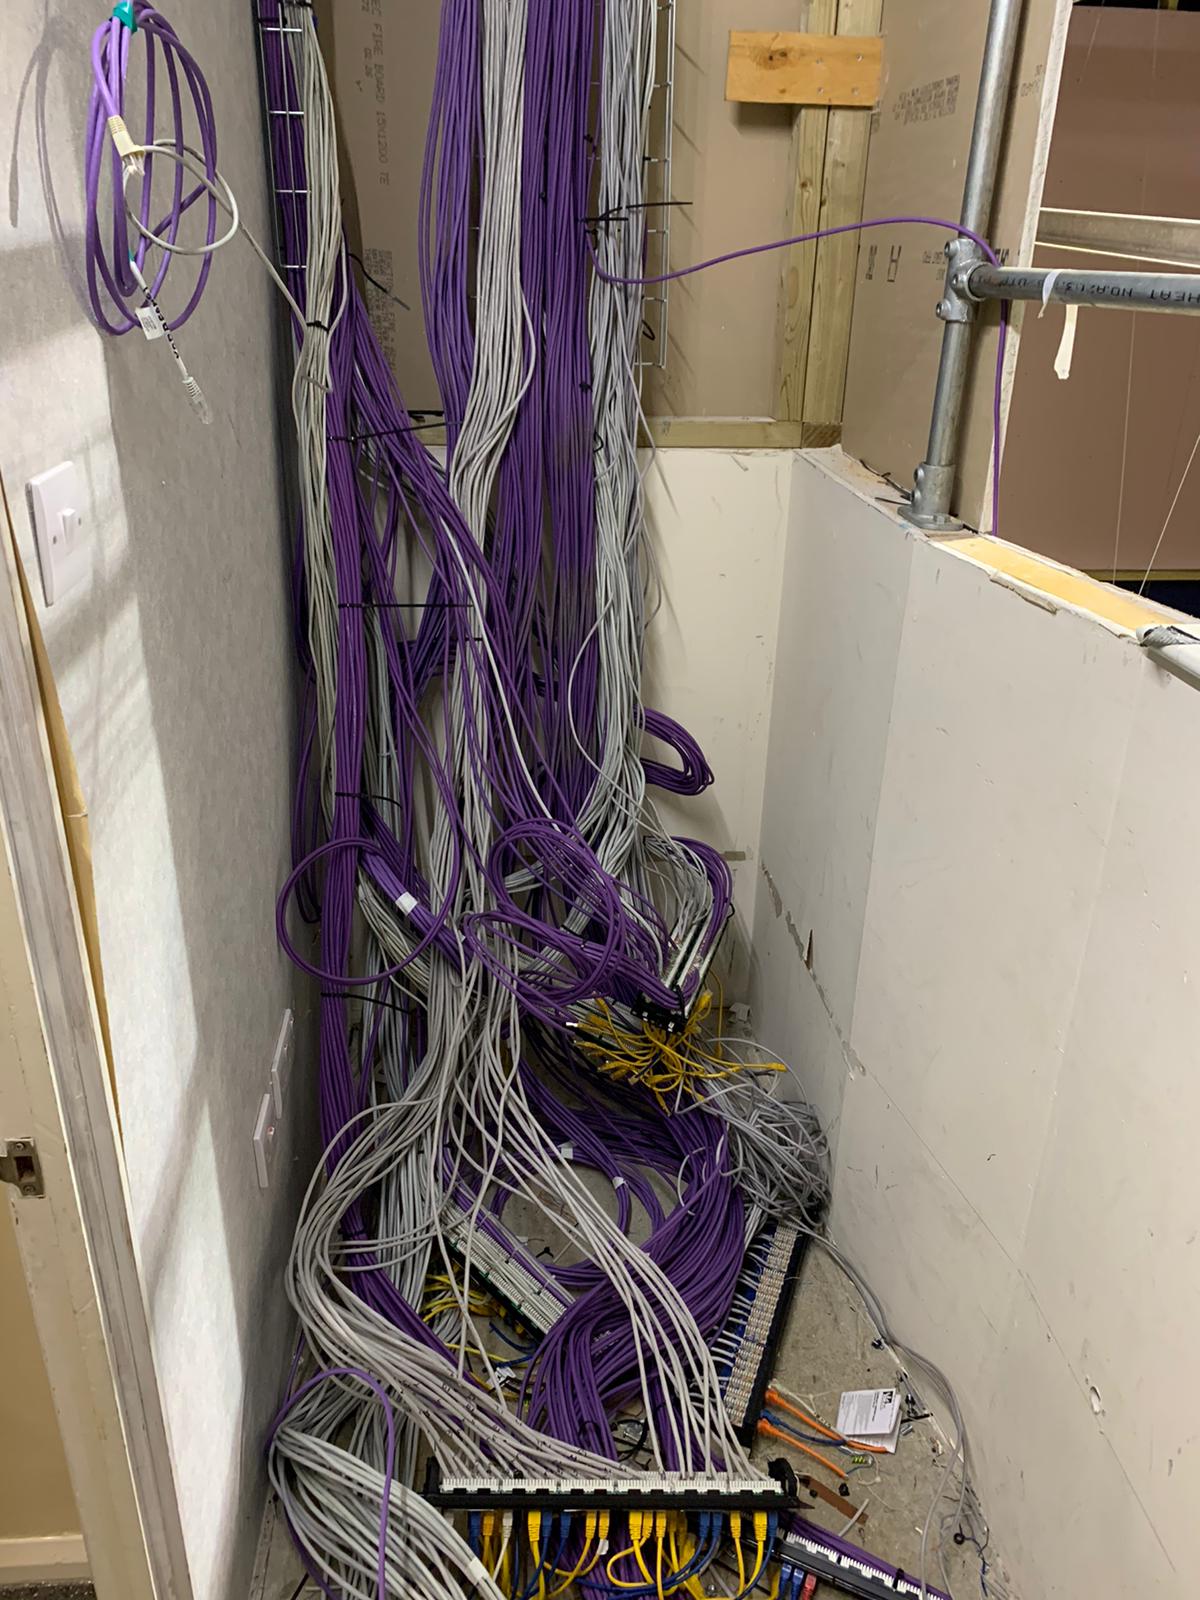 cables hanging down